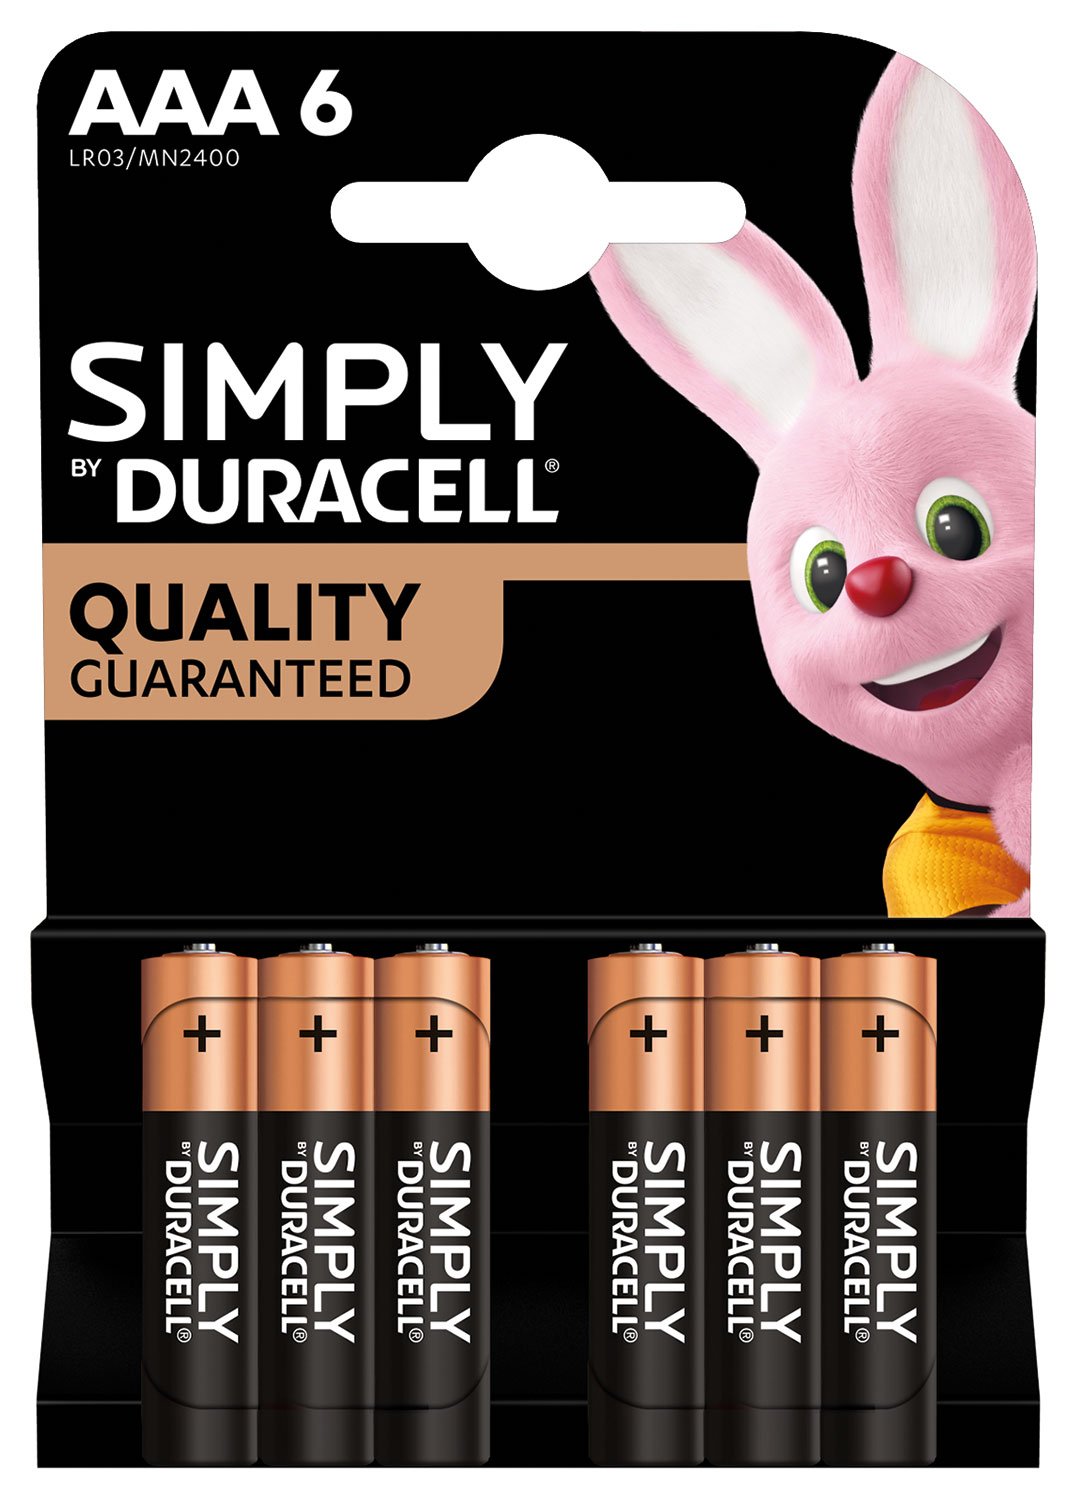 Simply Duracell Alkaline Batteries AAA Simply Duracell Alkaline Batteries 6 Pack